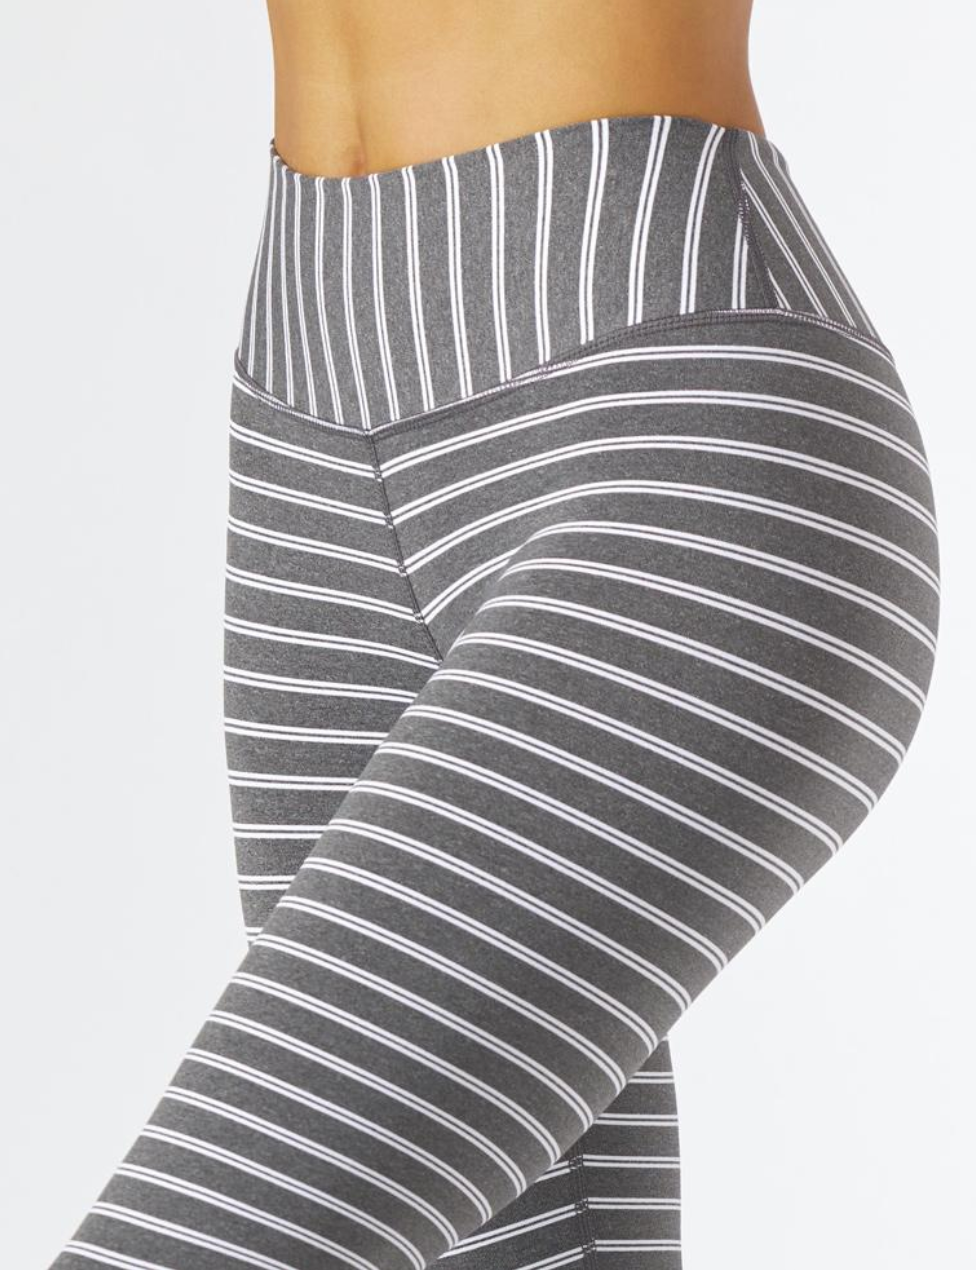 Pure Barre Women's Extra Small High Waisted Patterned Leggings Size XS -  $28 - From Madi